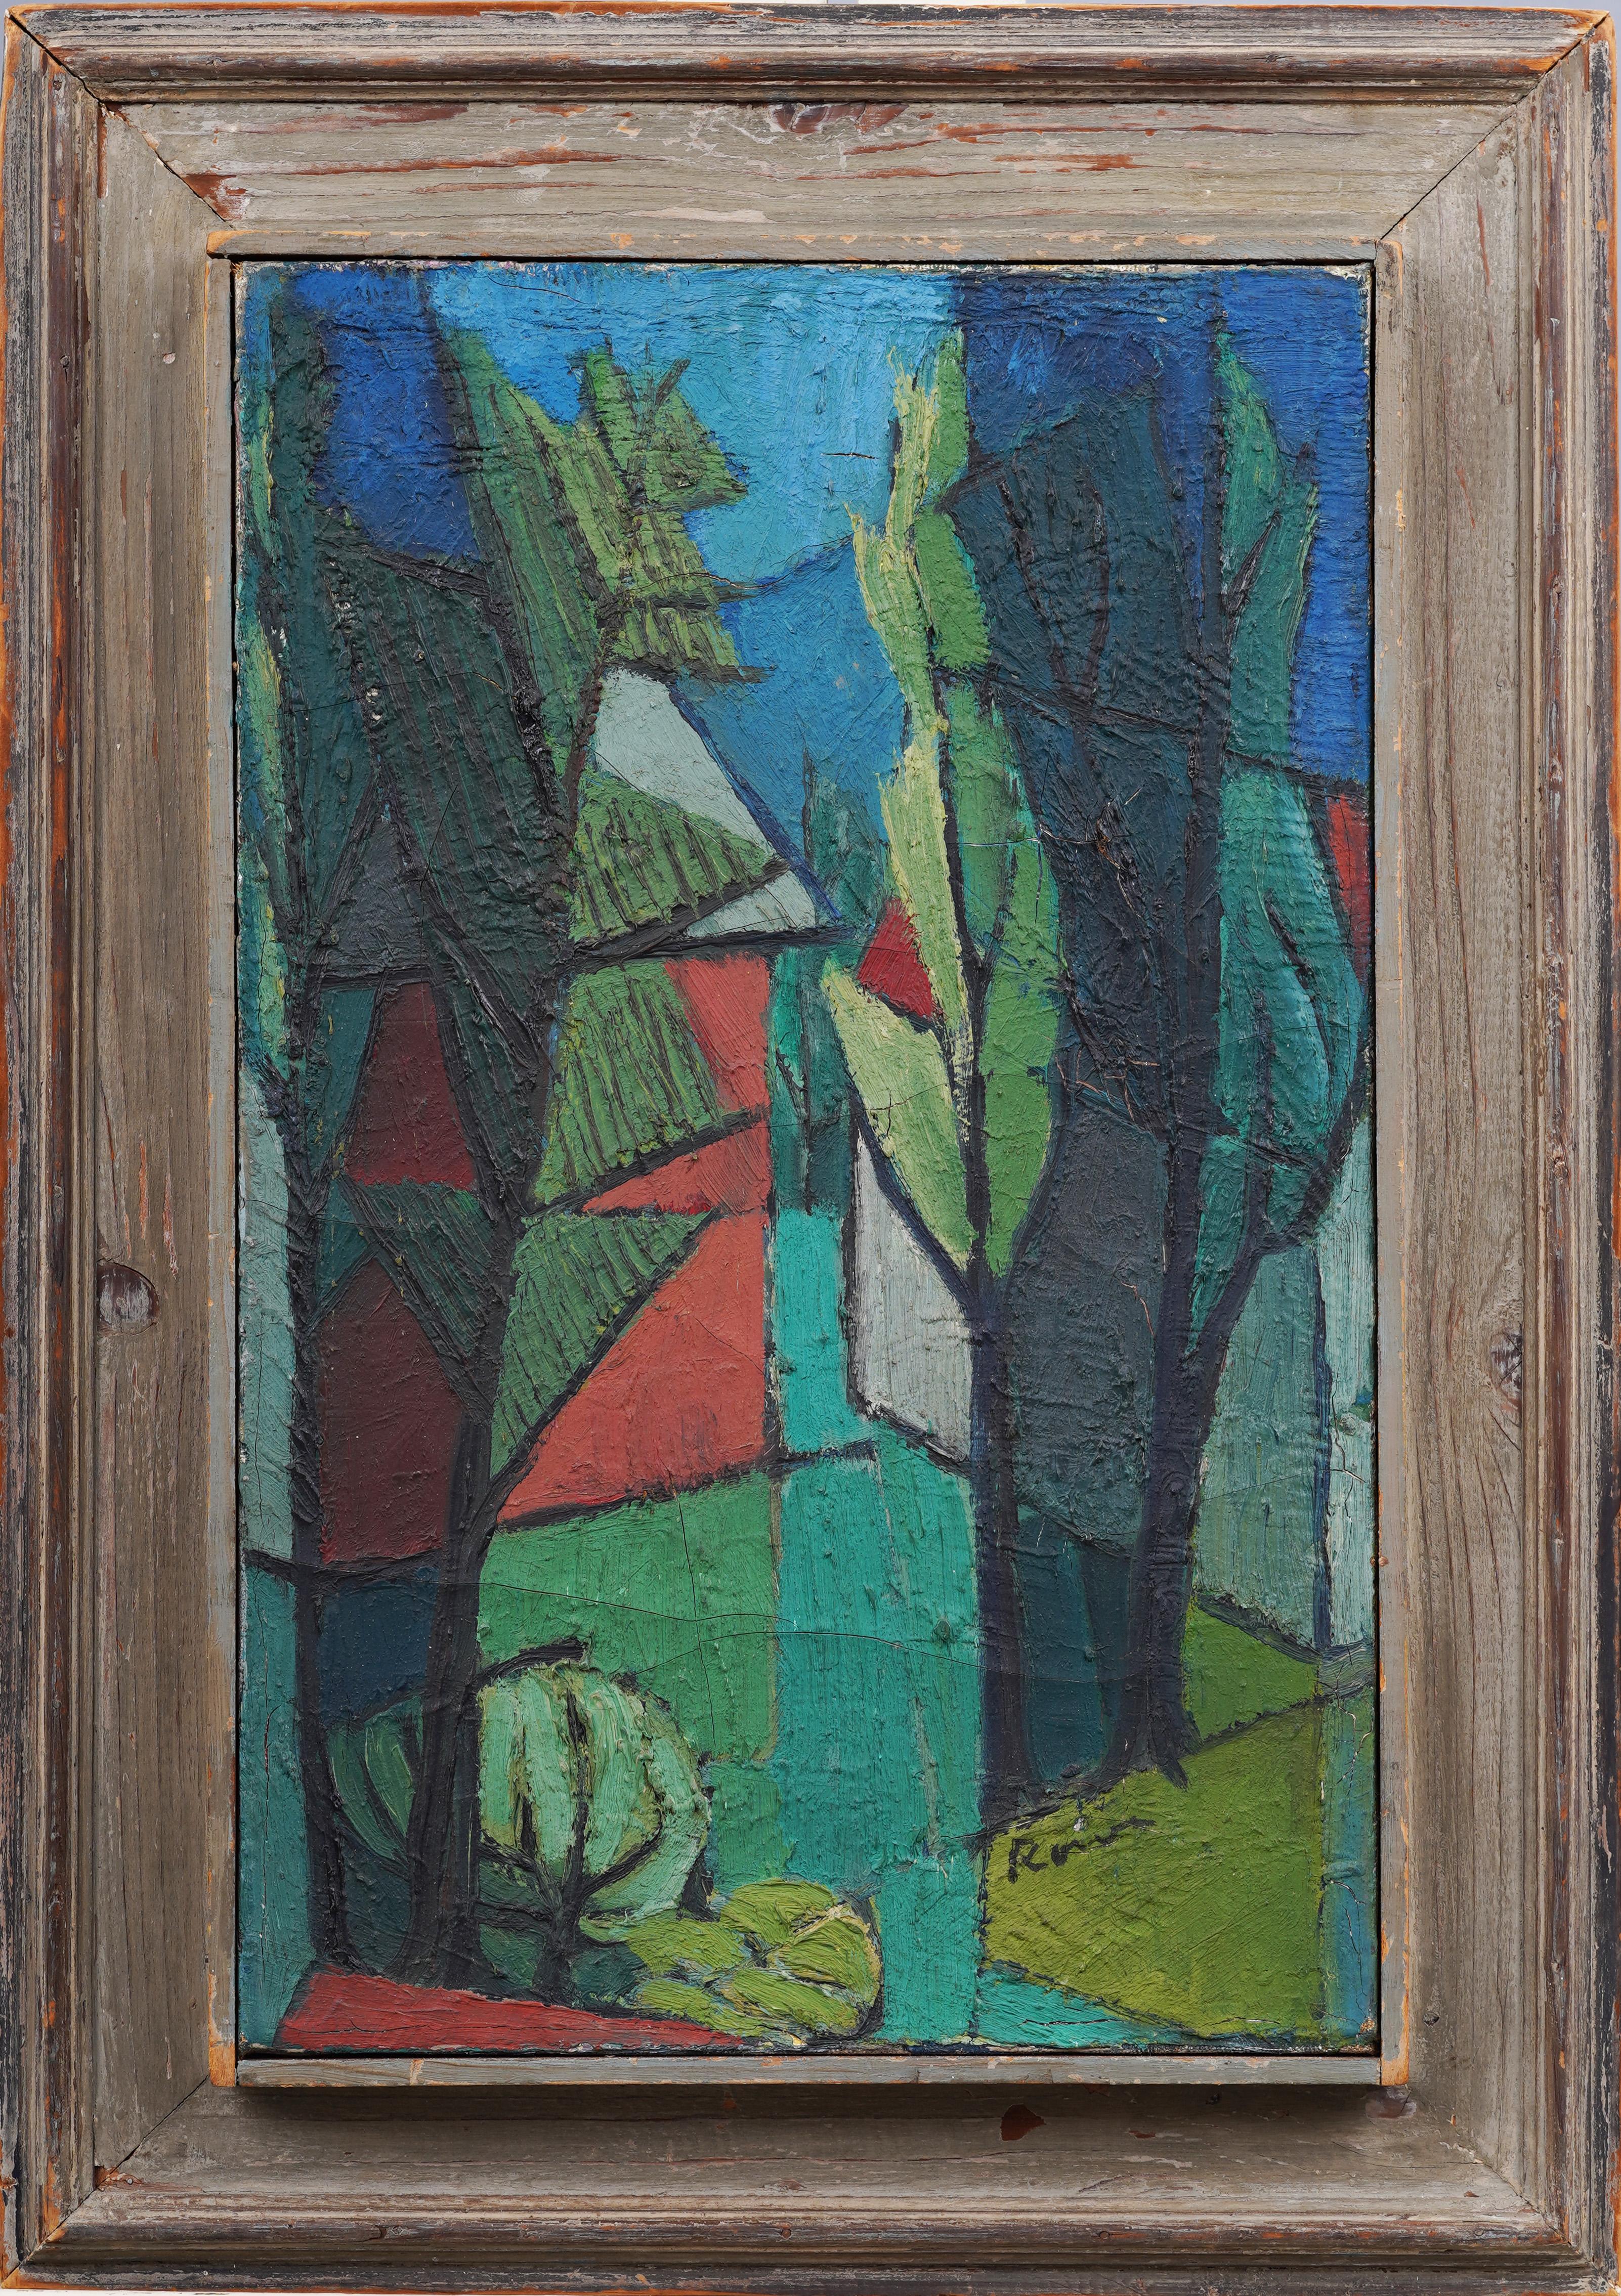 Nicely painted mid century abstract cubist landscape oil painting.  Great color and composition.  Framed.  Signed.